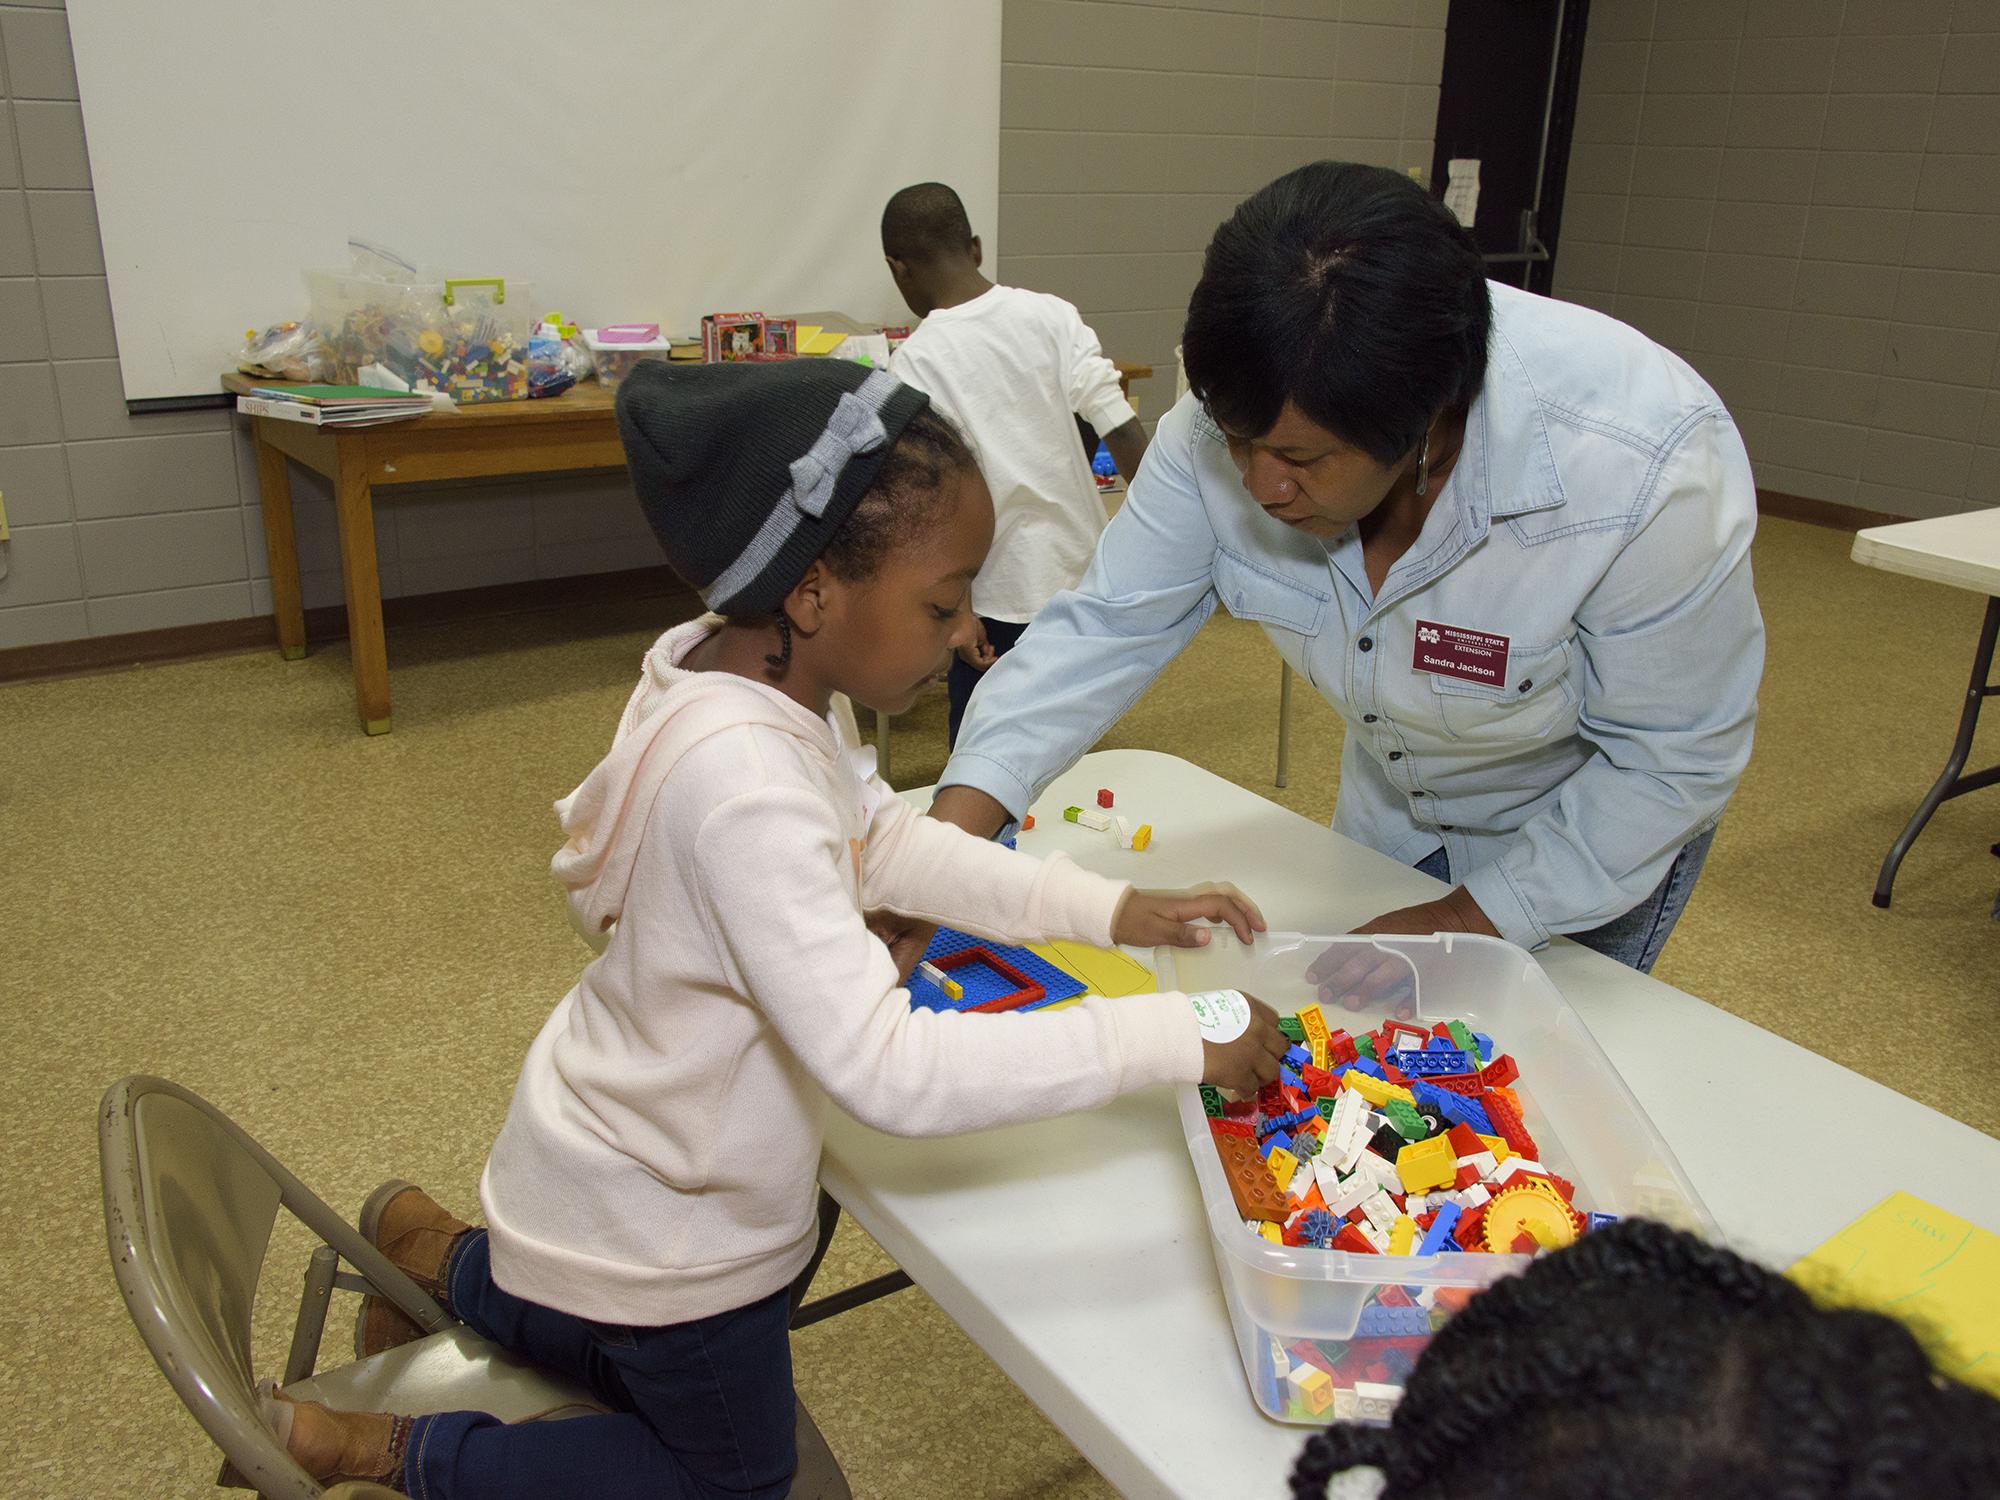 Sandra Jackson, an agent of the Mississippi State University Extension Service in Winston County, helps 6-year-old Akilah Goss assemble a Lego maze March 16, 2017. Jackson was the first agent to teach the 4-H Lego Engineering Club curriculum, which is a STEM program geared toward 4-H’ers aged 5 to 7. (Photo by MSU Extension/Kevin Hudson)